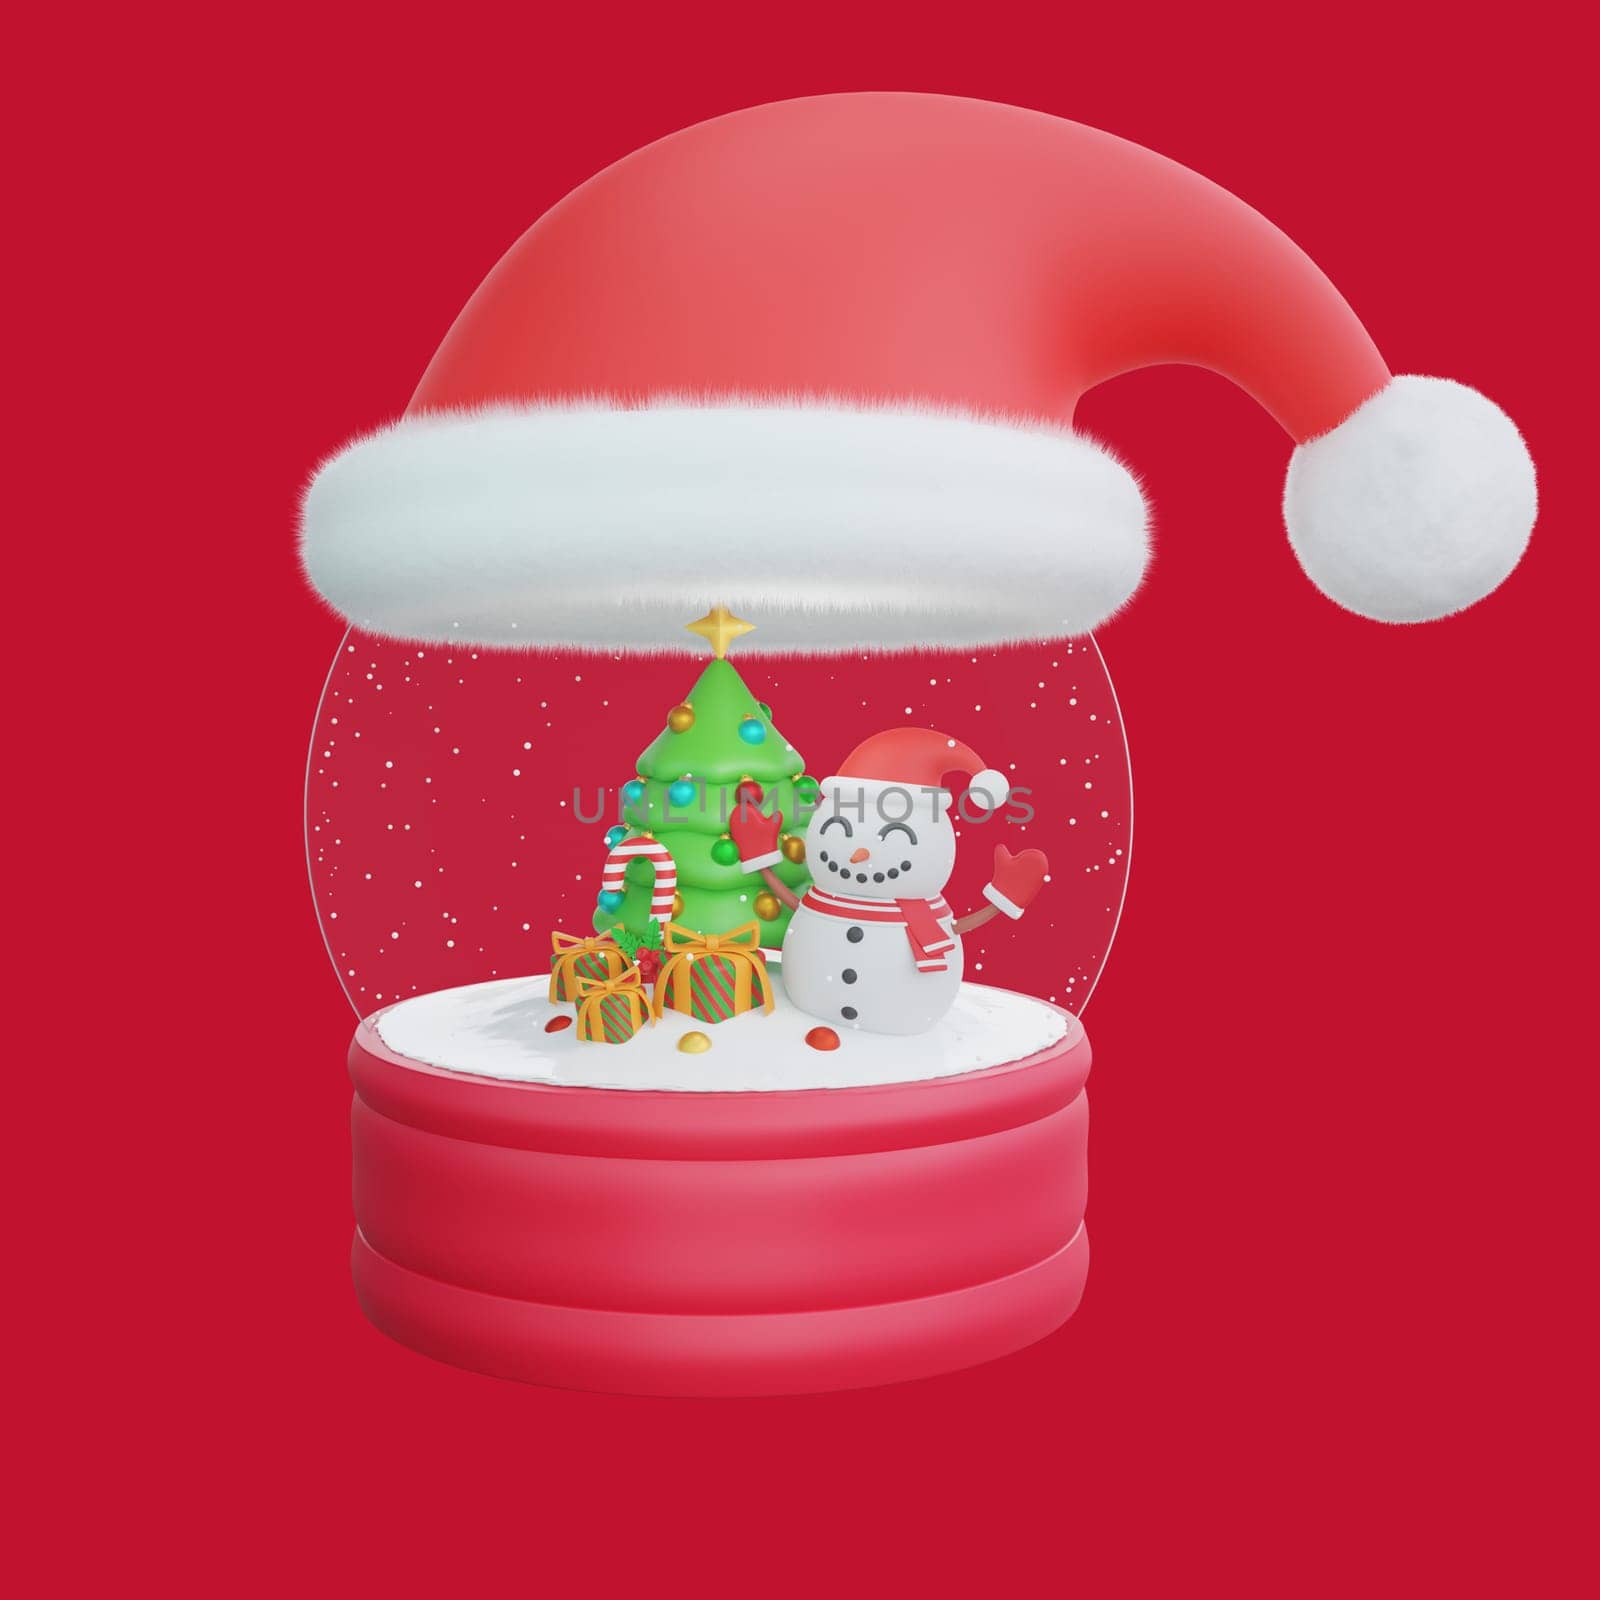 3D illustration of a Christmas snow globe topped with a red Santa hat. Inside the globe, a Christmas tree, a cheerful snowman, and colorful presents create a charming holiday scene. Perfect for Christmas and Happy New Year celebrations